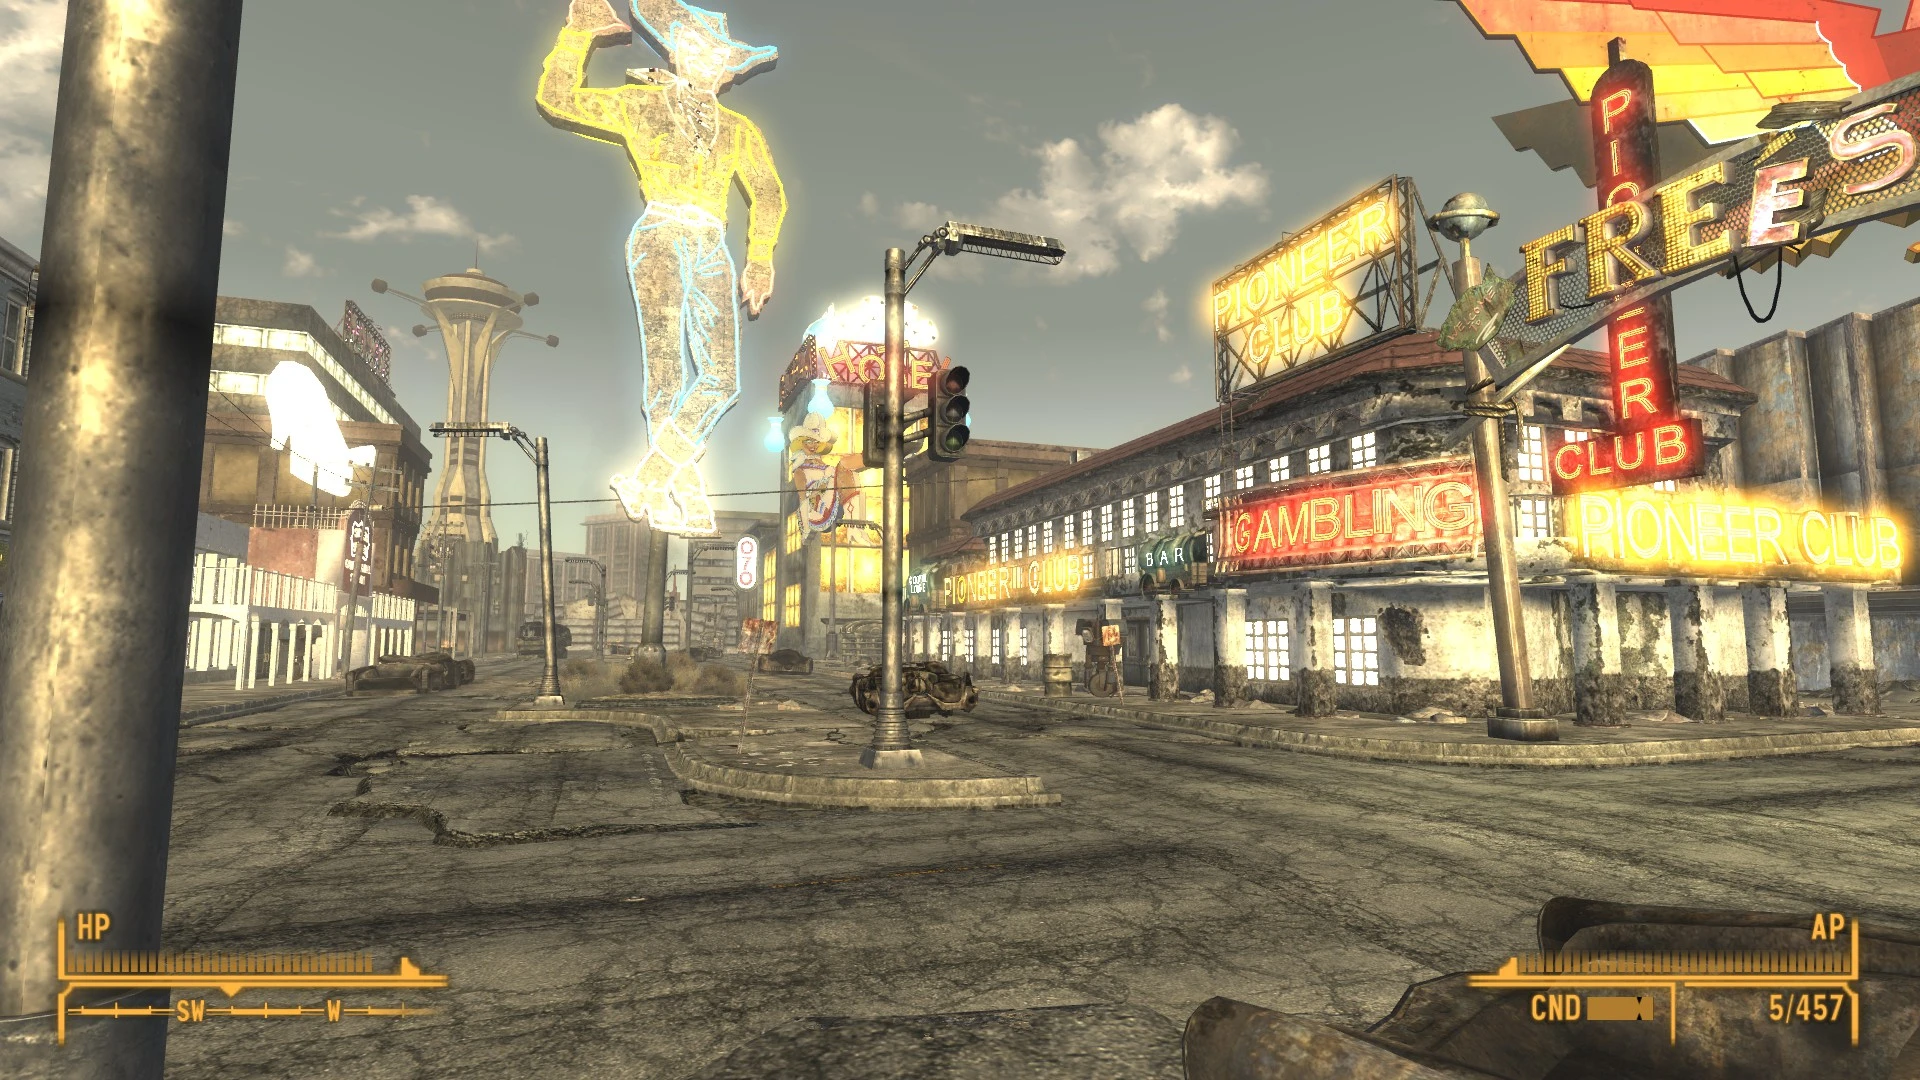 5 Best Fallout New Vegas Mods of July 2019